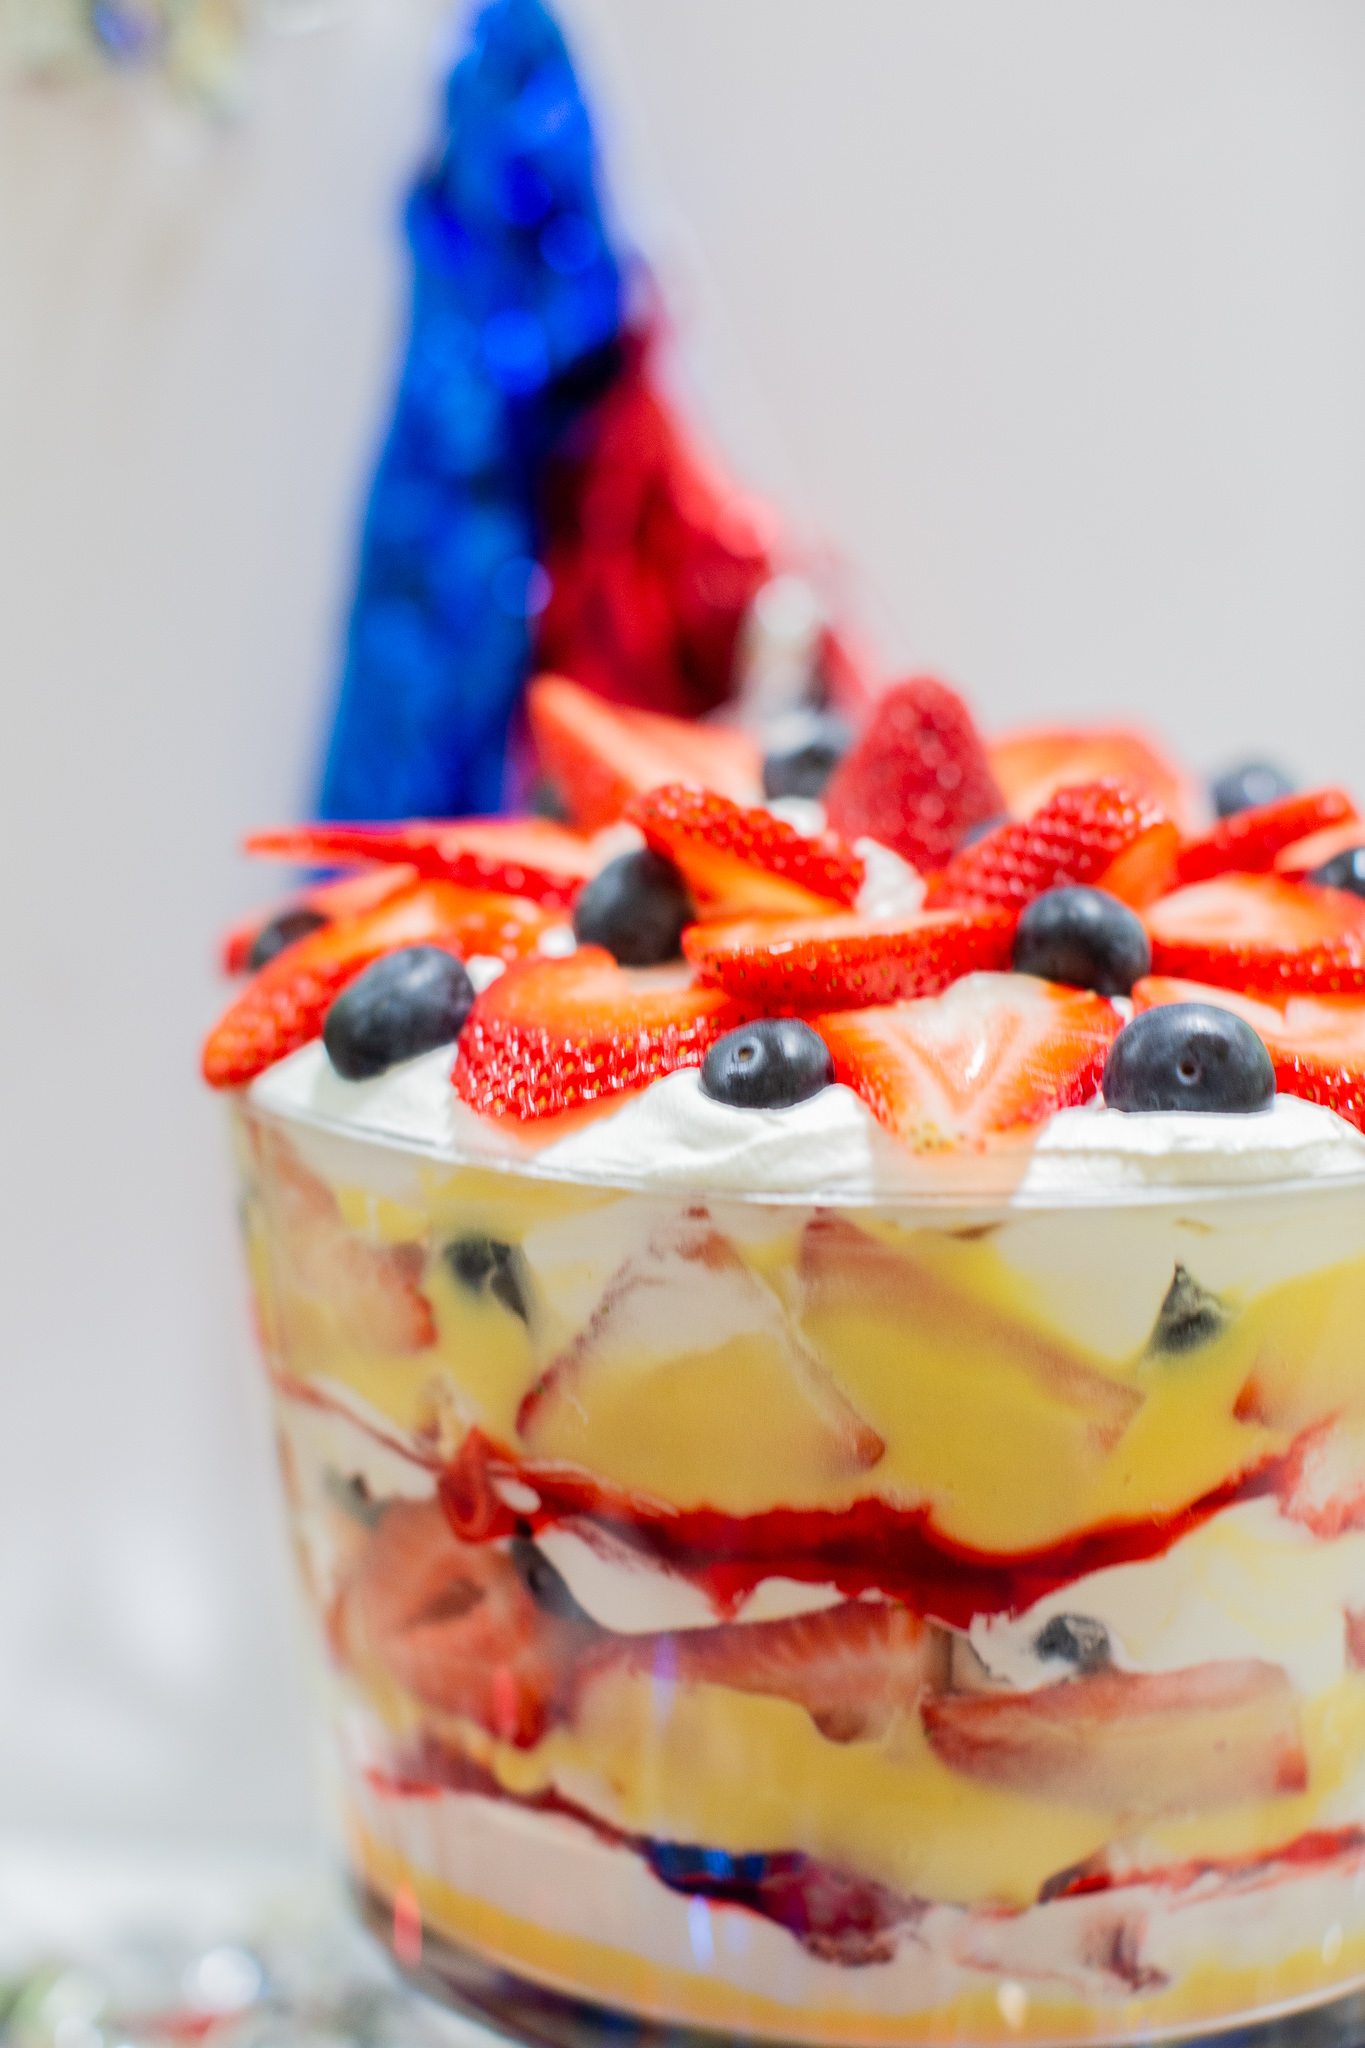 Three Berry Vanilla Pudding Trifle Recipe (the Perfect Summertime Dessert) by popular lifestyle blog, Coffee Beans and Bobby Pins: image of a three berry vanilla pudding trifle in a trifle dish with a red and blue tassel banner hanging in the background.